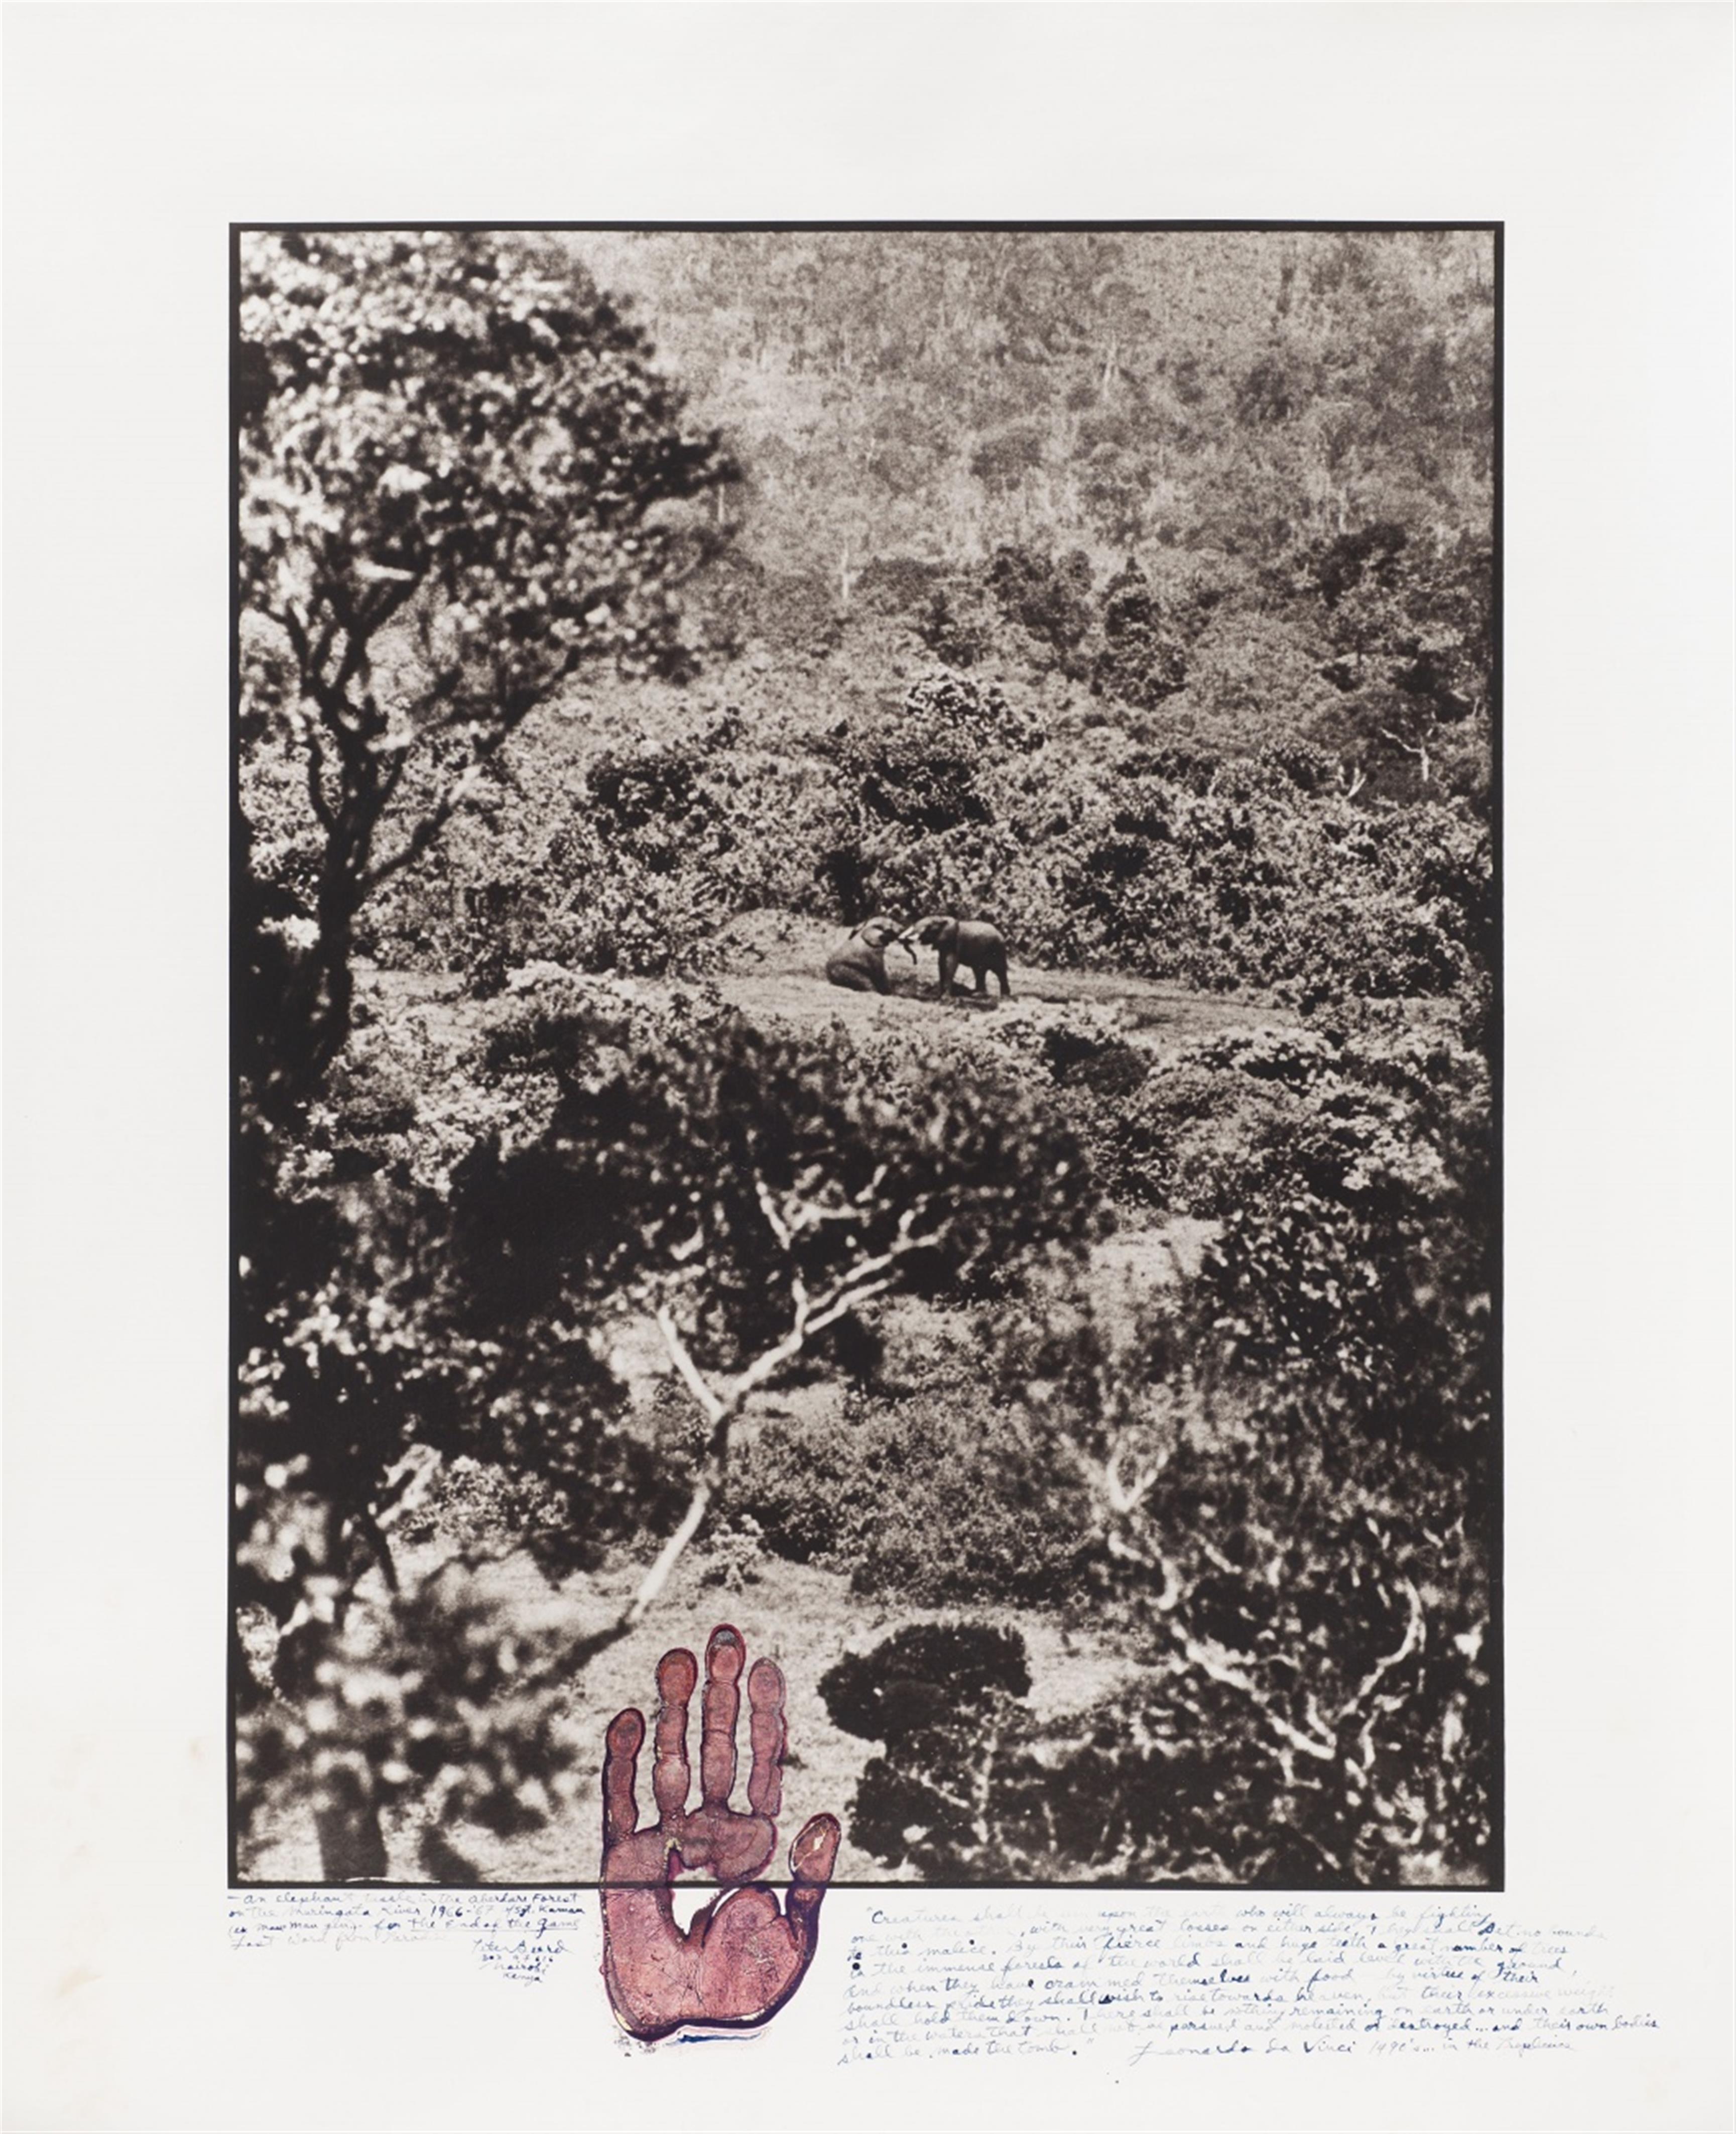 Peter Beard - Elephant tussle in the Aberdare Forest (aus der Serie: The End of the Game/Last Word from Paradise) - image-1